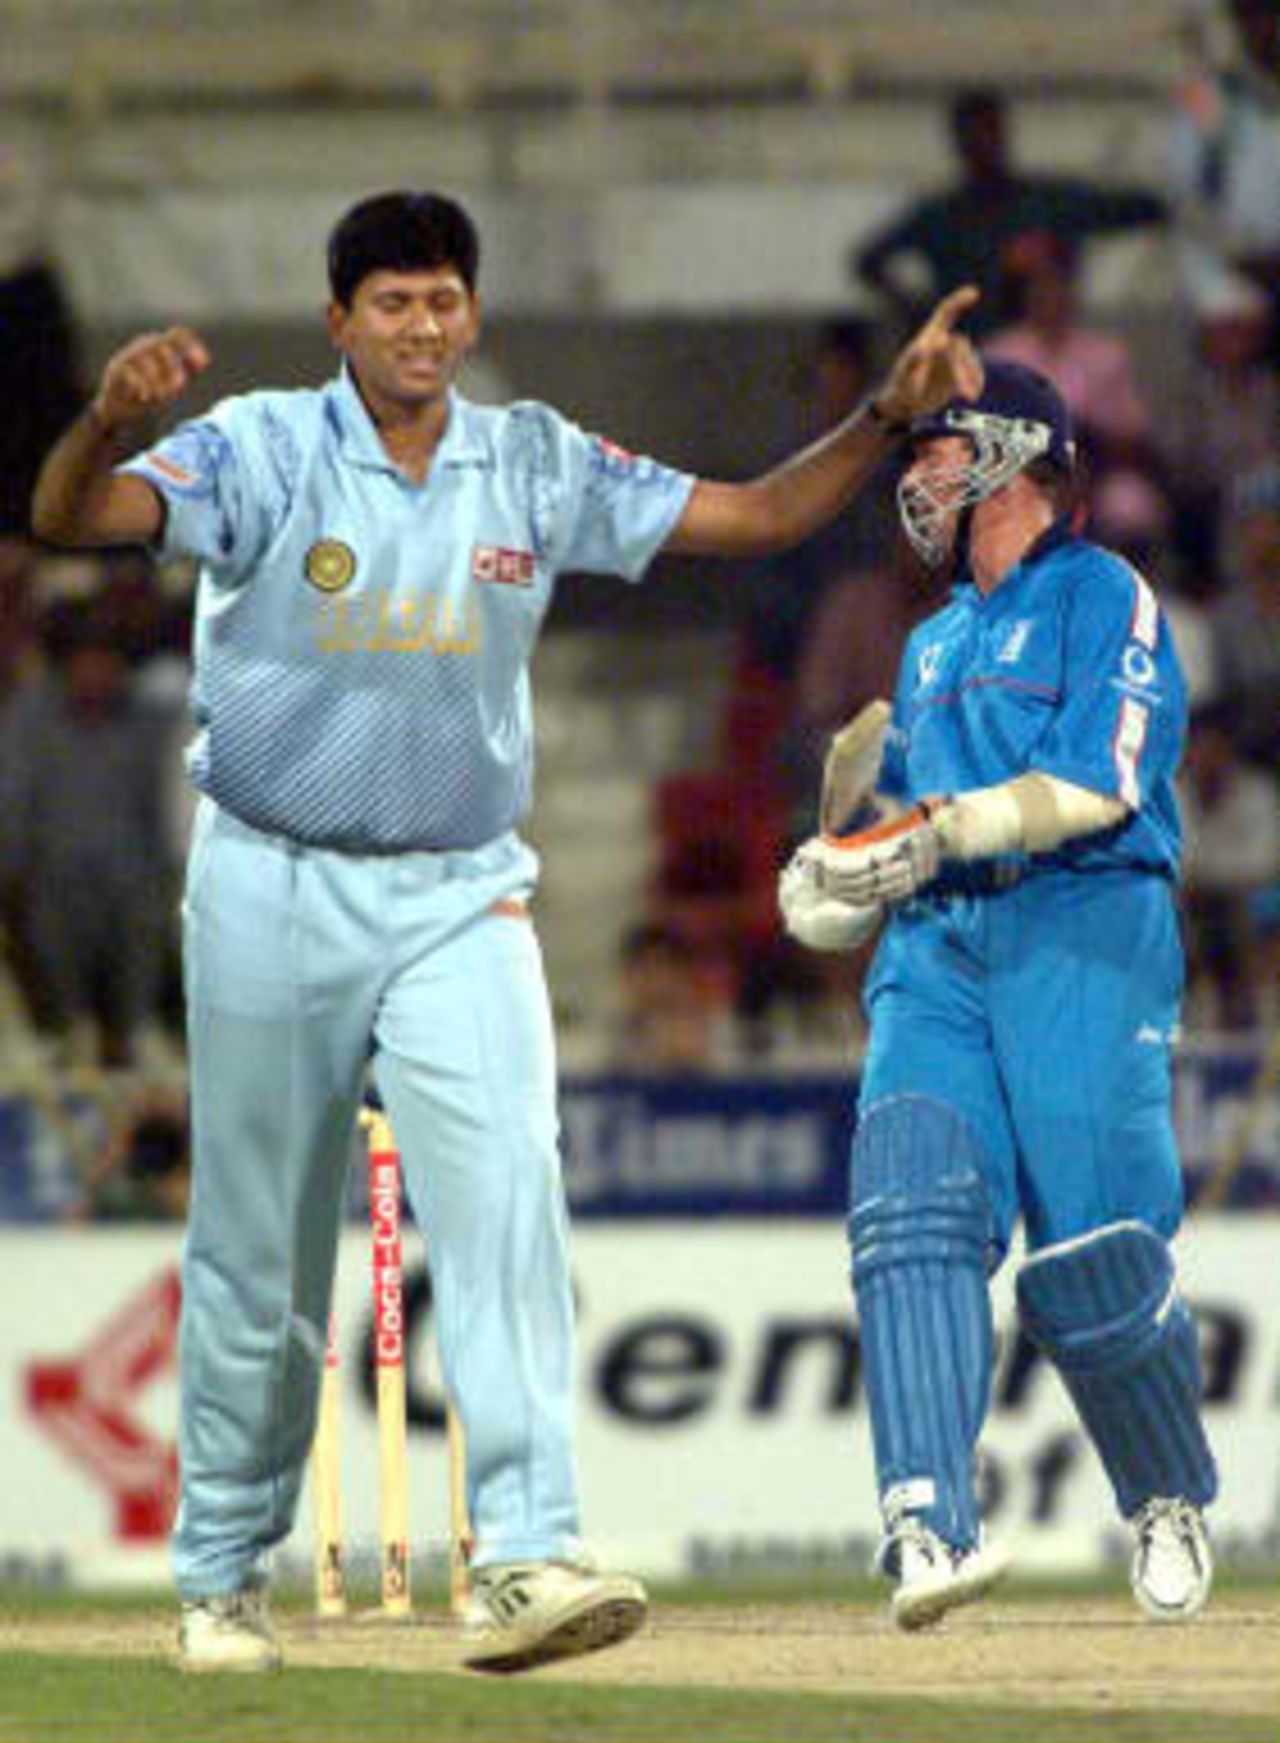 Indian bowler Venkatesh Prasad takes the wicket of England's Mark Ealham for only 7 runs in the 3rd match of the Coca Cola Championships on 9th April 1999 being played in Sharjah, U.A.E.